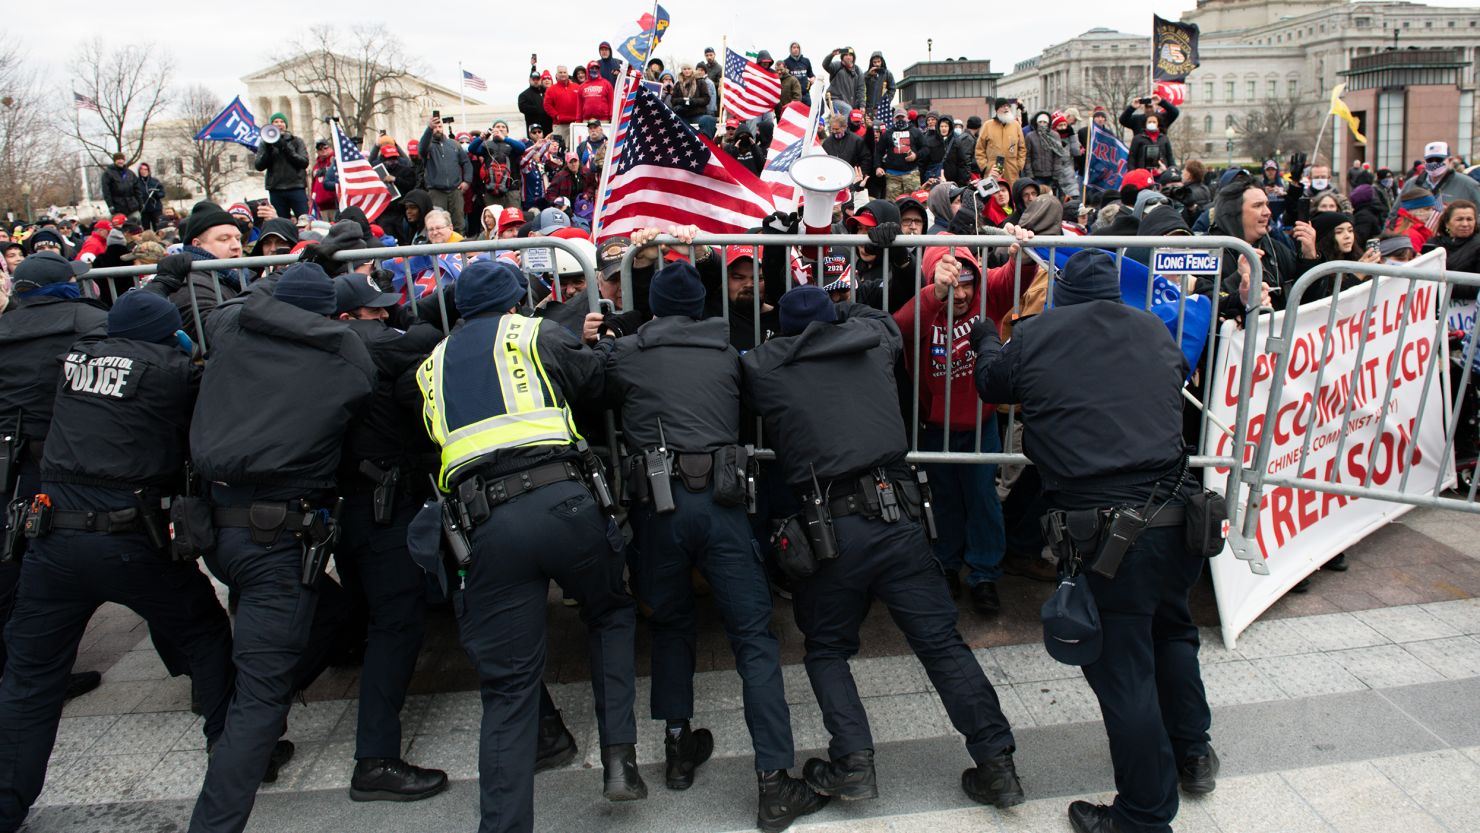 In this January 6, 2021, file photo, US Capitol Police scuffle with demonstrators after they broke through security fencing outside the Capitol in Washington.